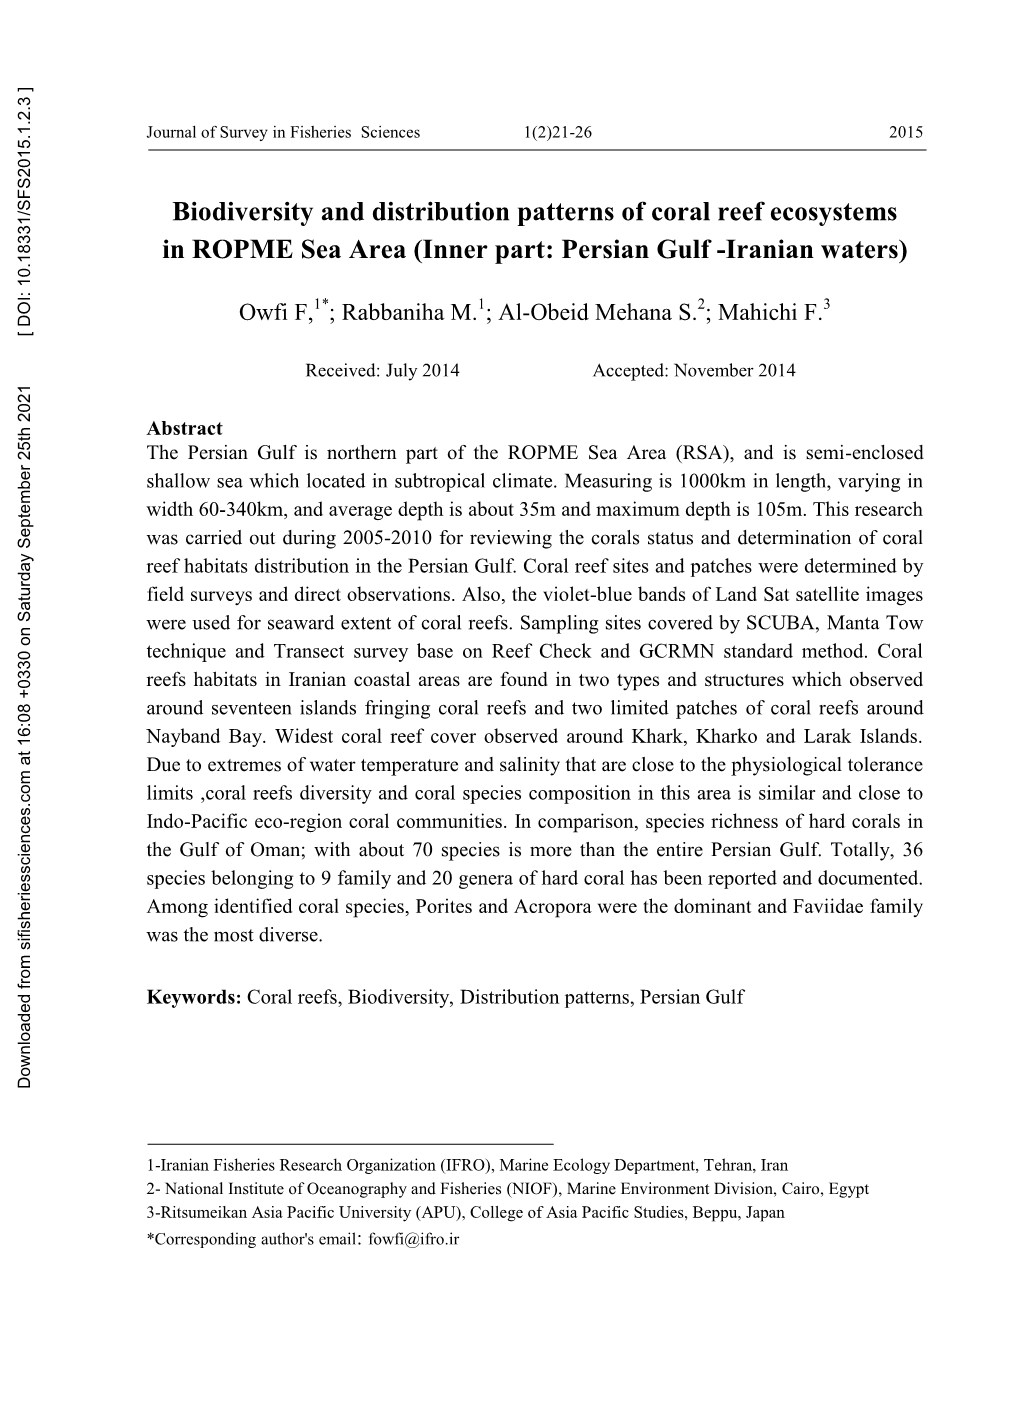 Biodiversity and Distribution Patterns of Coral Reef Ecosystems in ROPME Sea Area (Inner Part: Persian Gulf -Iranian Waters)